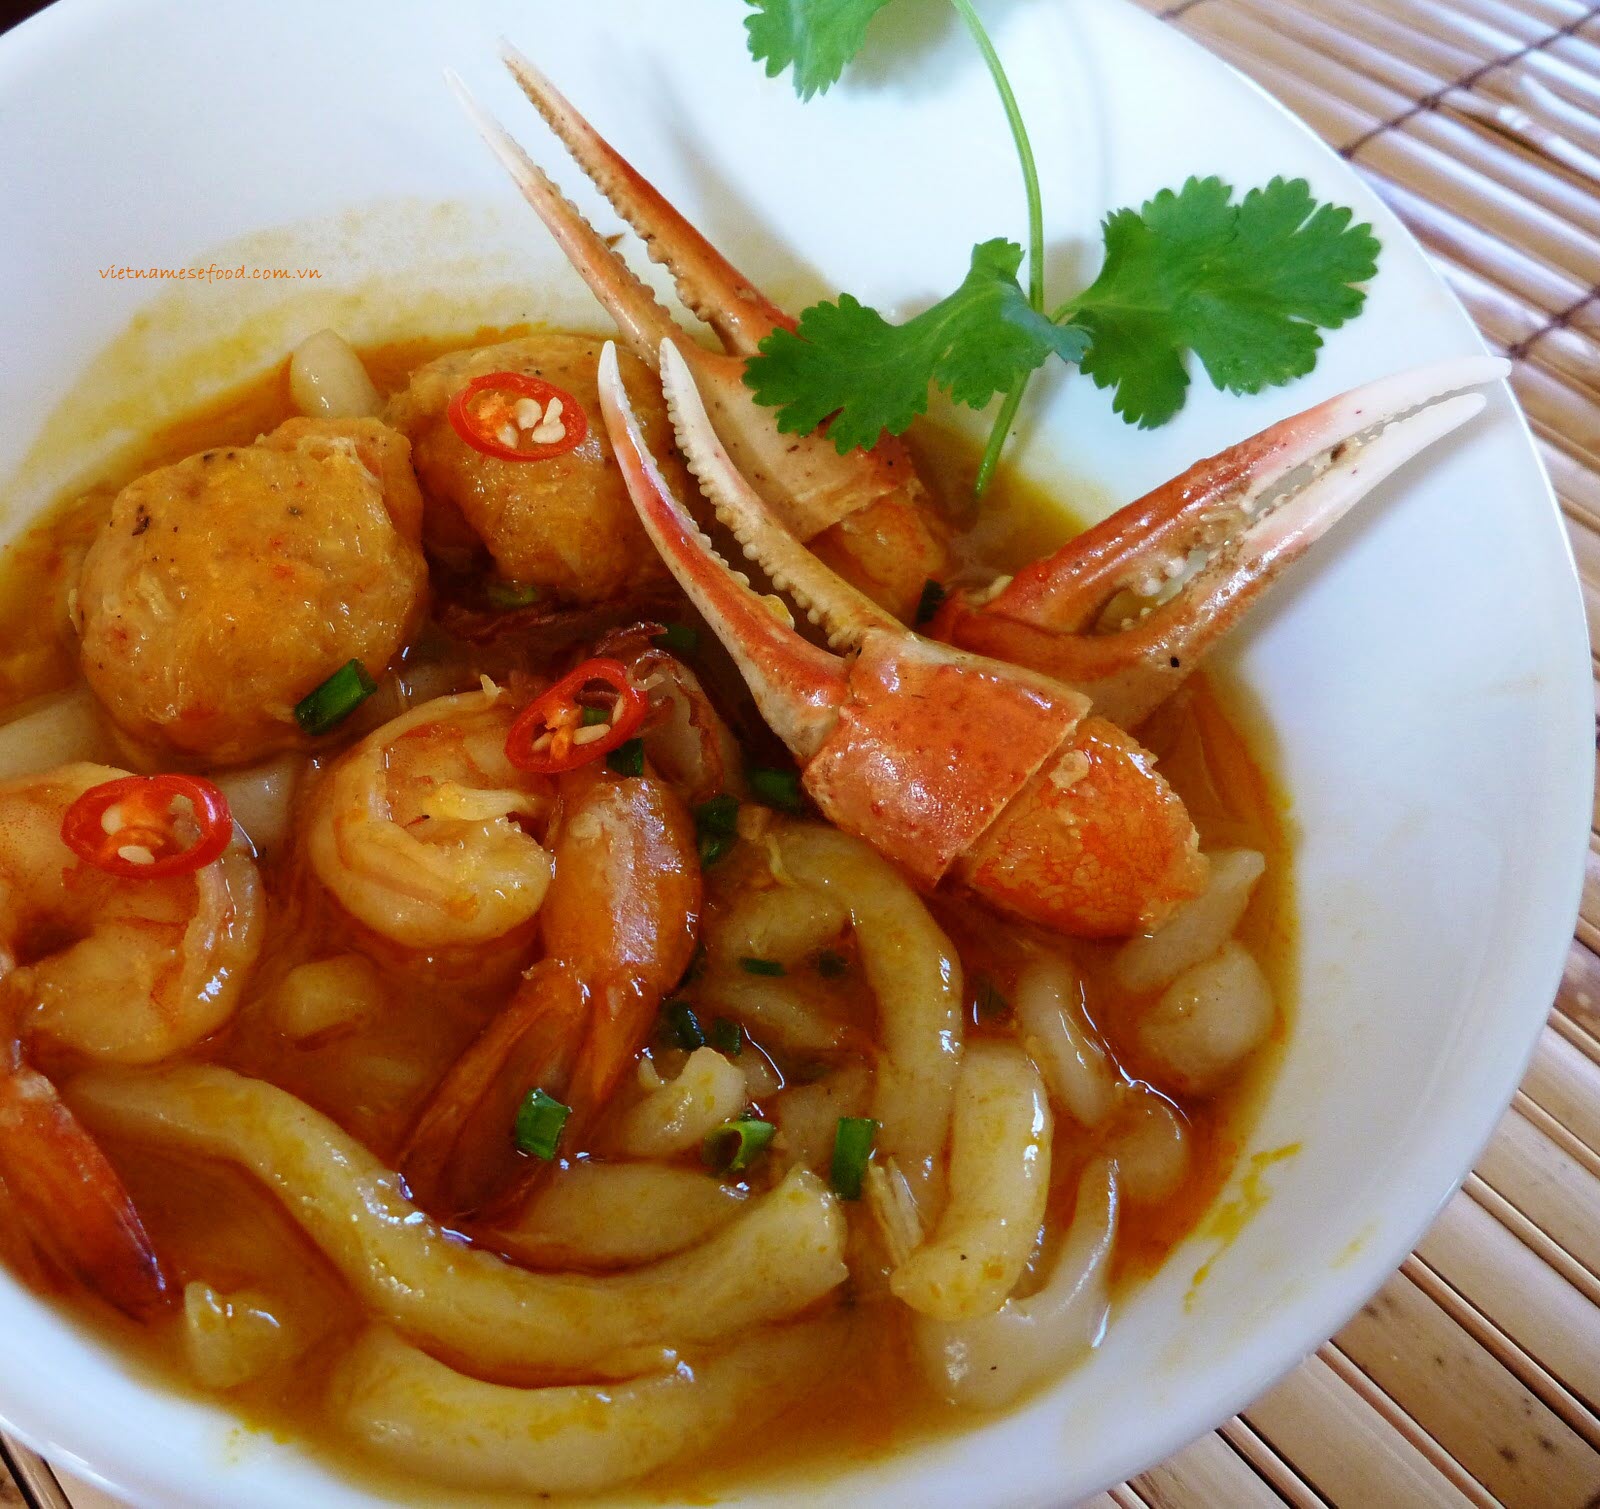 Rice Spaghetti Soup with Crab and Shrimp Recipe (Bánh Canh Tôm Cua)